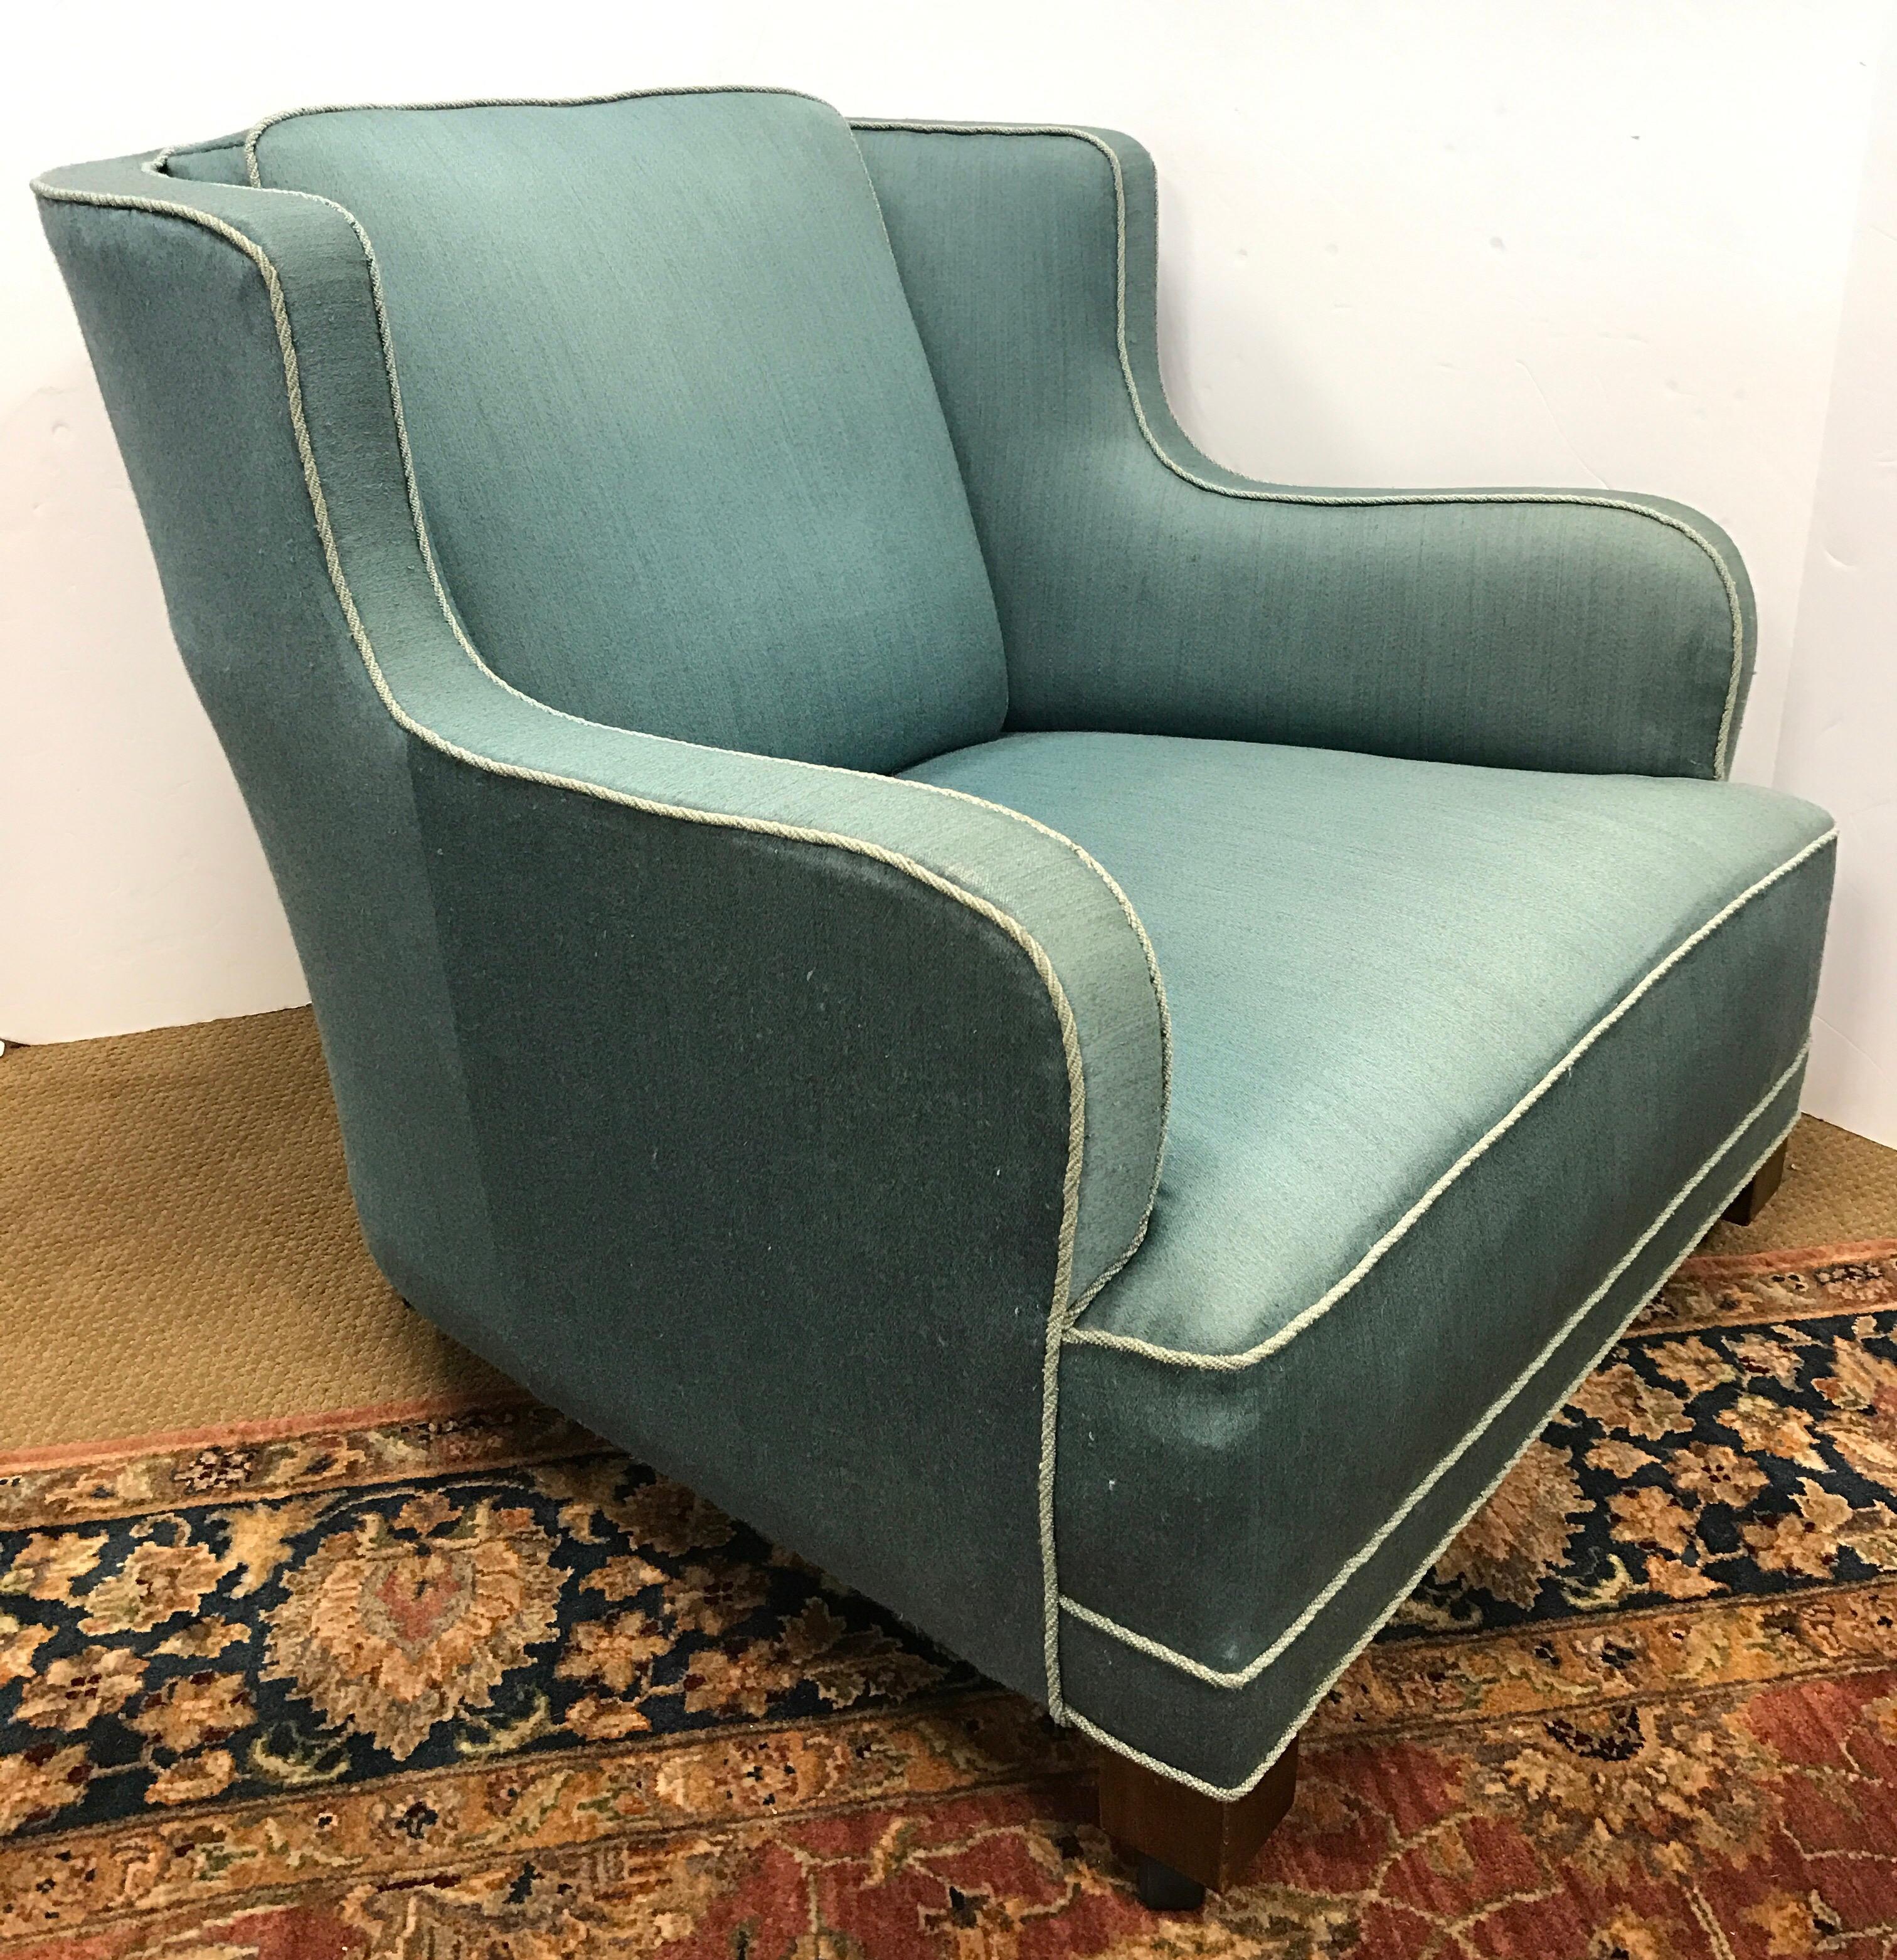 Stunning Danish modern, 1950s Danish aquamarine colored lounge chair. Upholstery is not original but is exquisite. Chairs legs at casters at bottom for ease of movement.